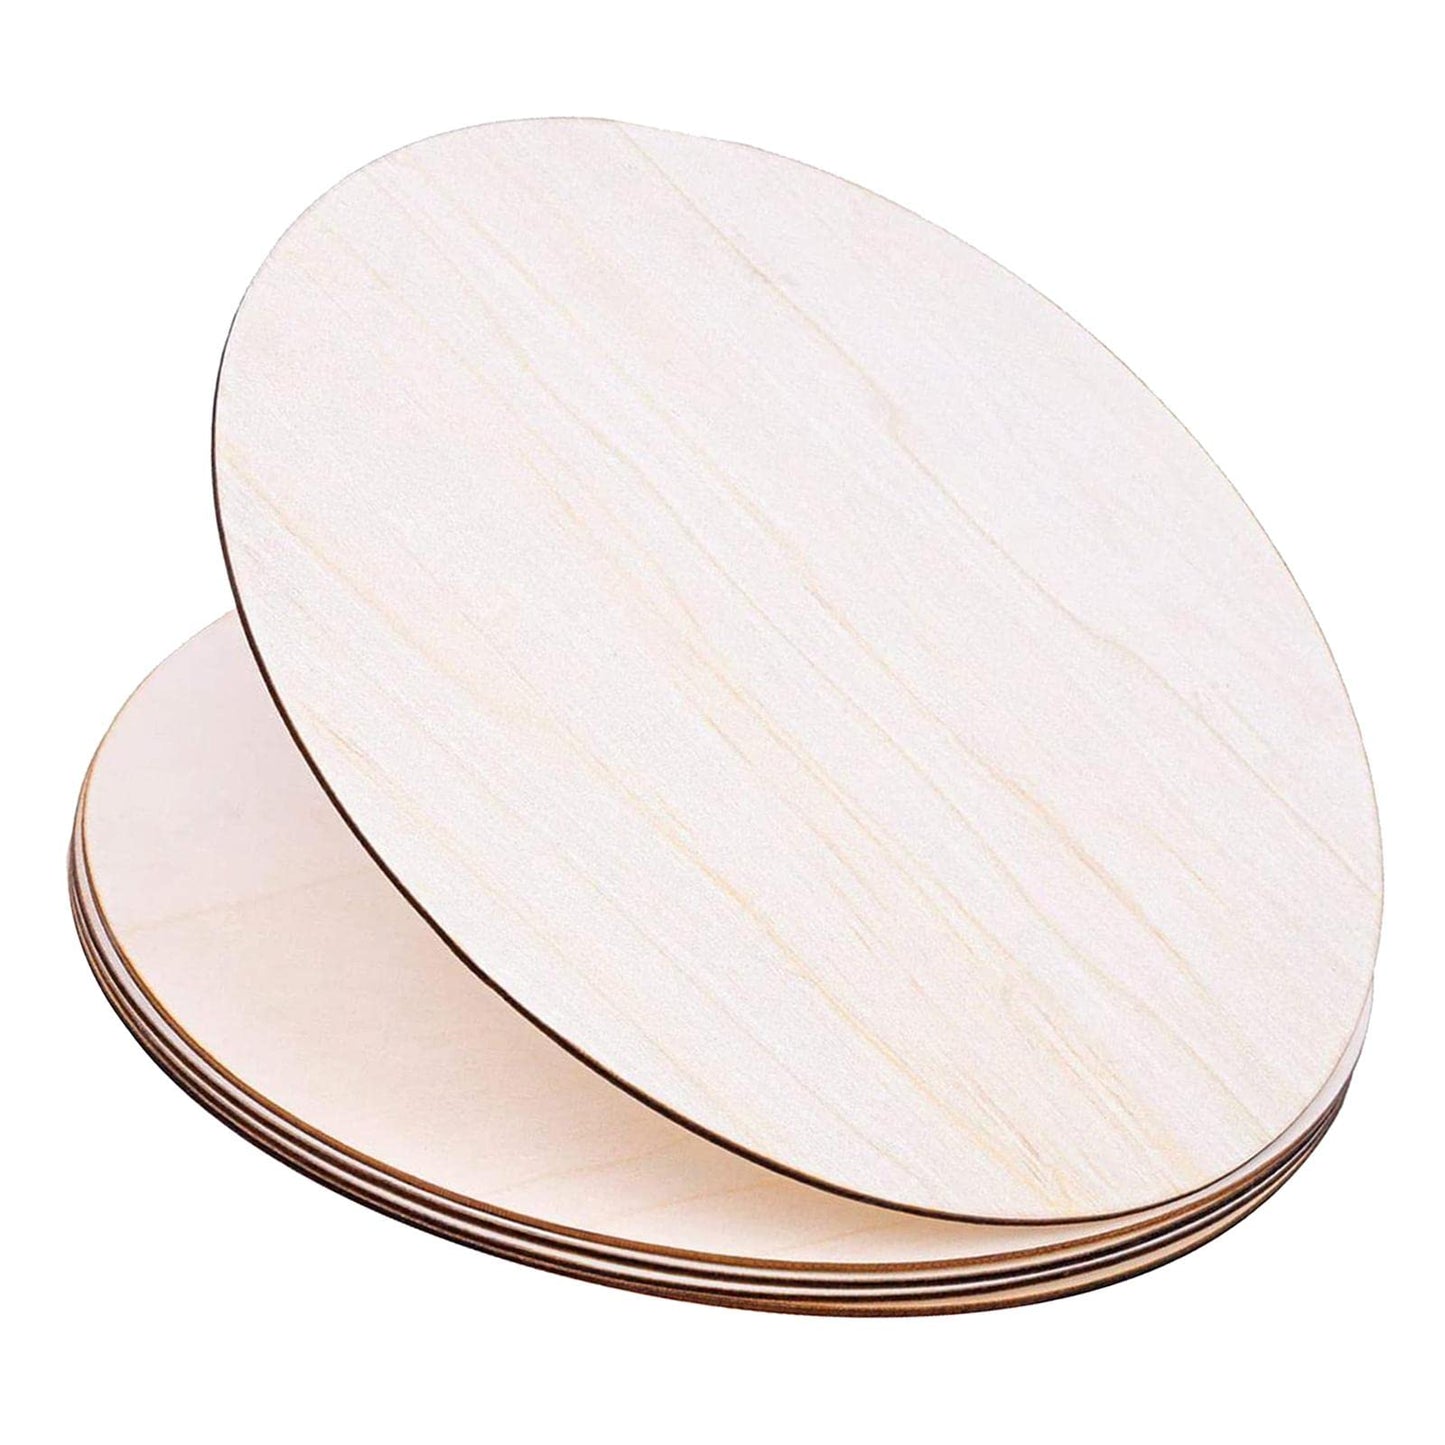 barenx 5PCS Wood Circles Unfinished Round Blank Wood Natural Wooden Round Cutouts